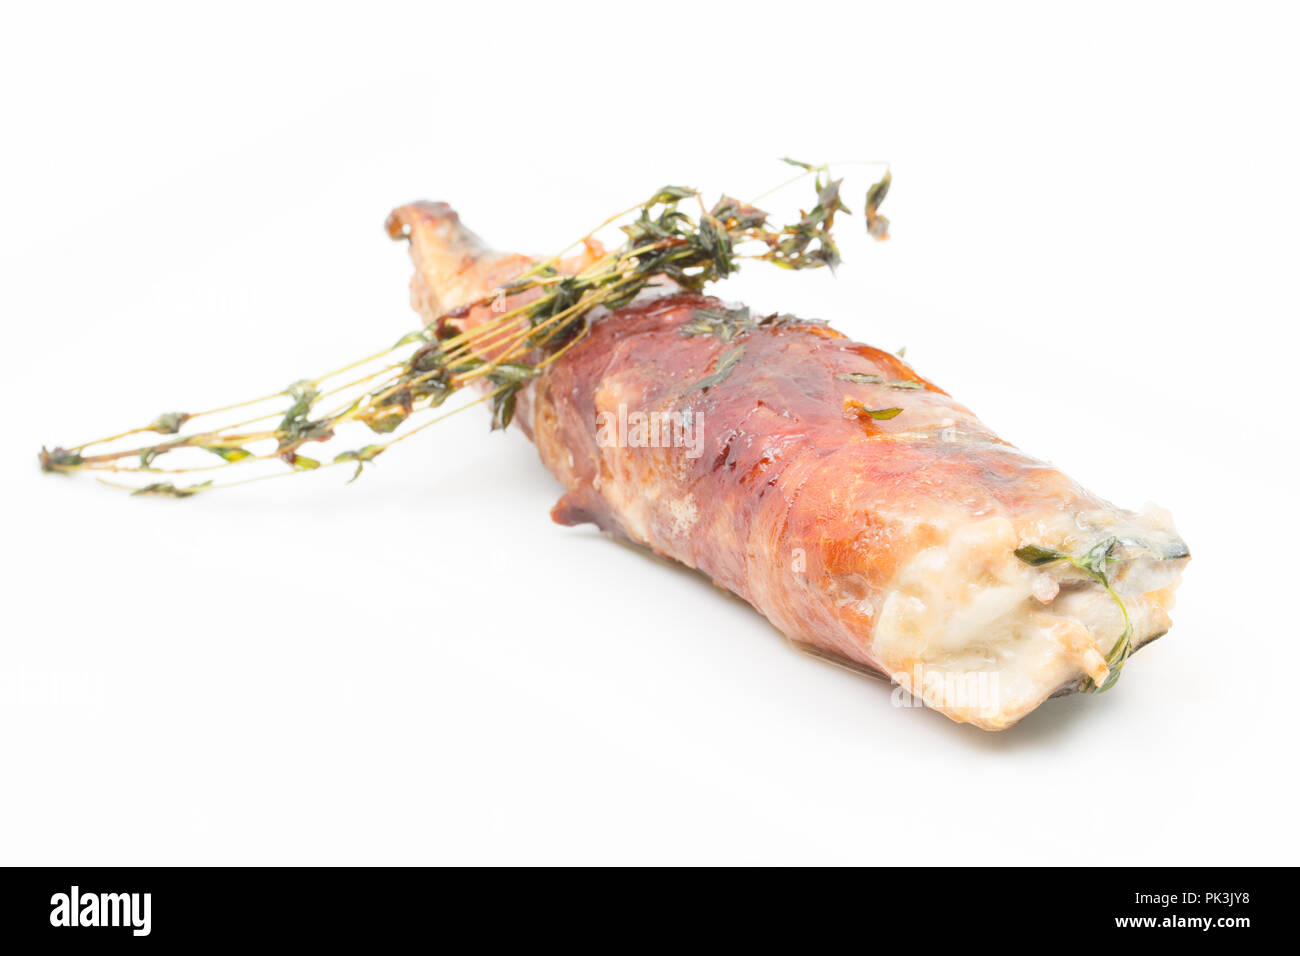 Two mackerel fillets, Scomber scombrus, that have had Parmesan cheese placed between them before being wrapped in Parma ham and then fried in butter a Stock Photo